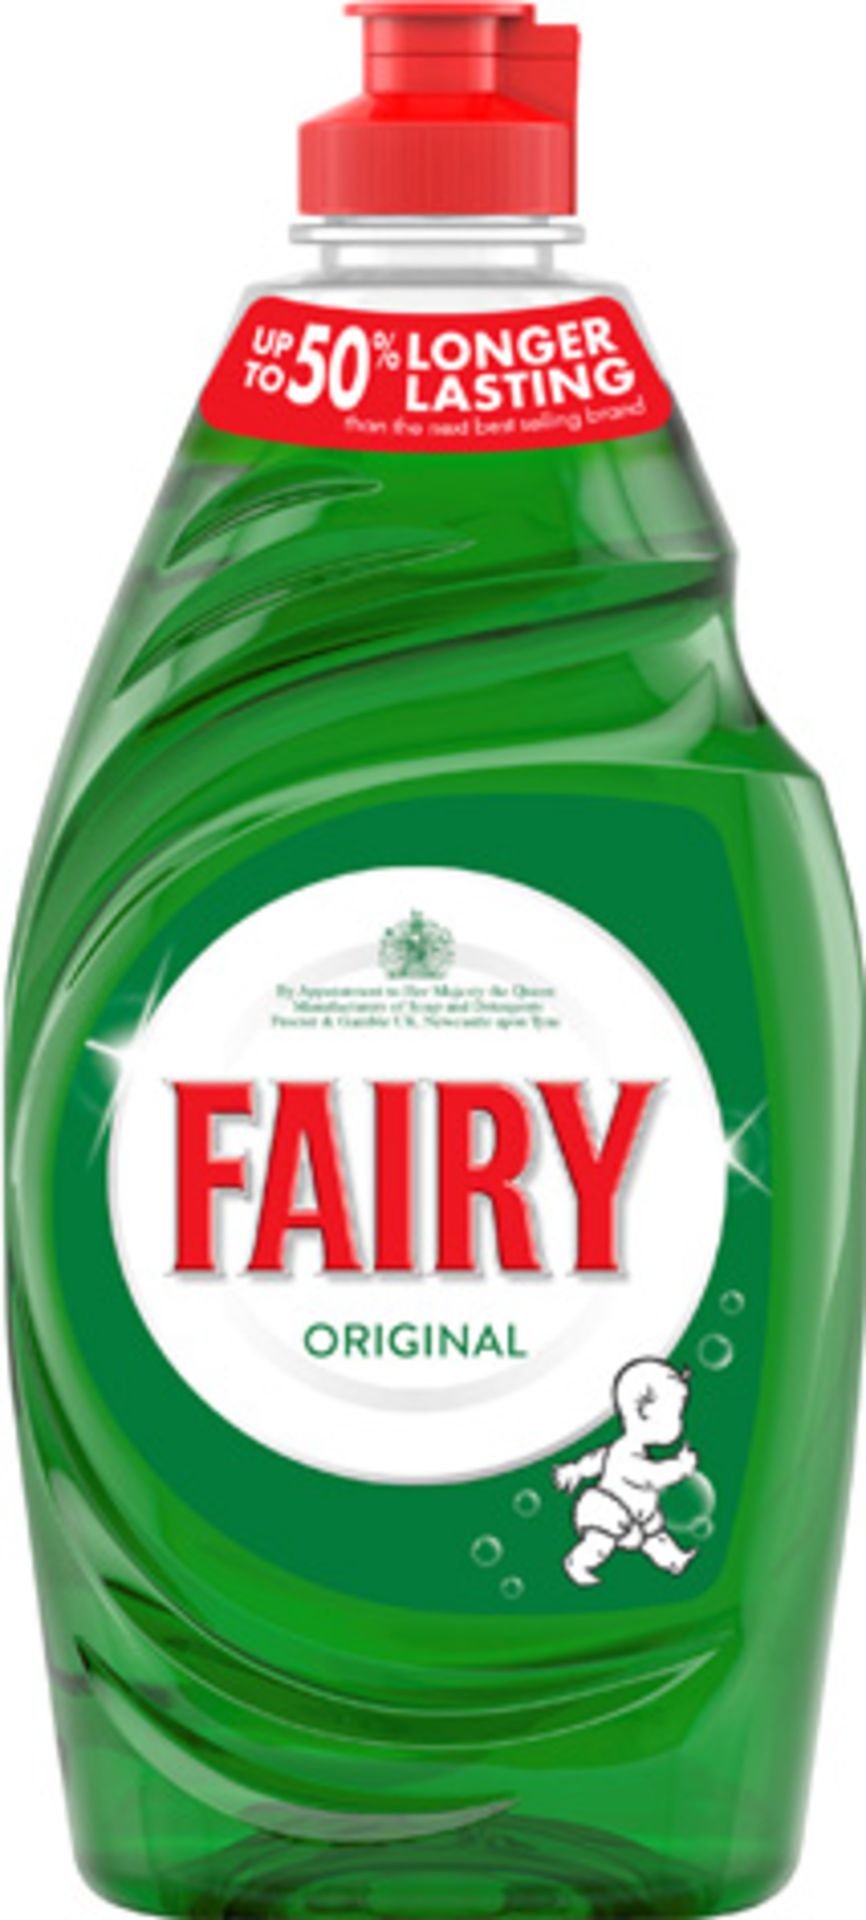 Fairy Washing Up Liquid Original 433ml x 100, Postage available by ParcelForce Express 48 £29.99